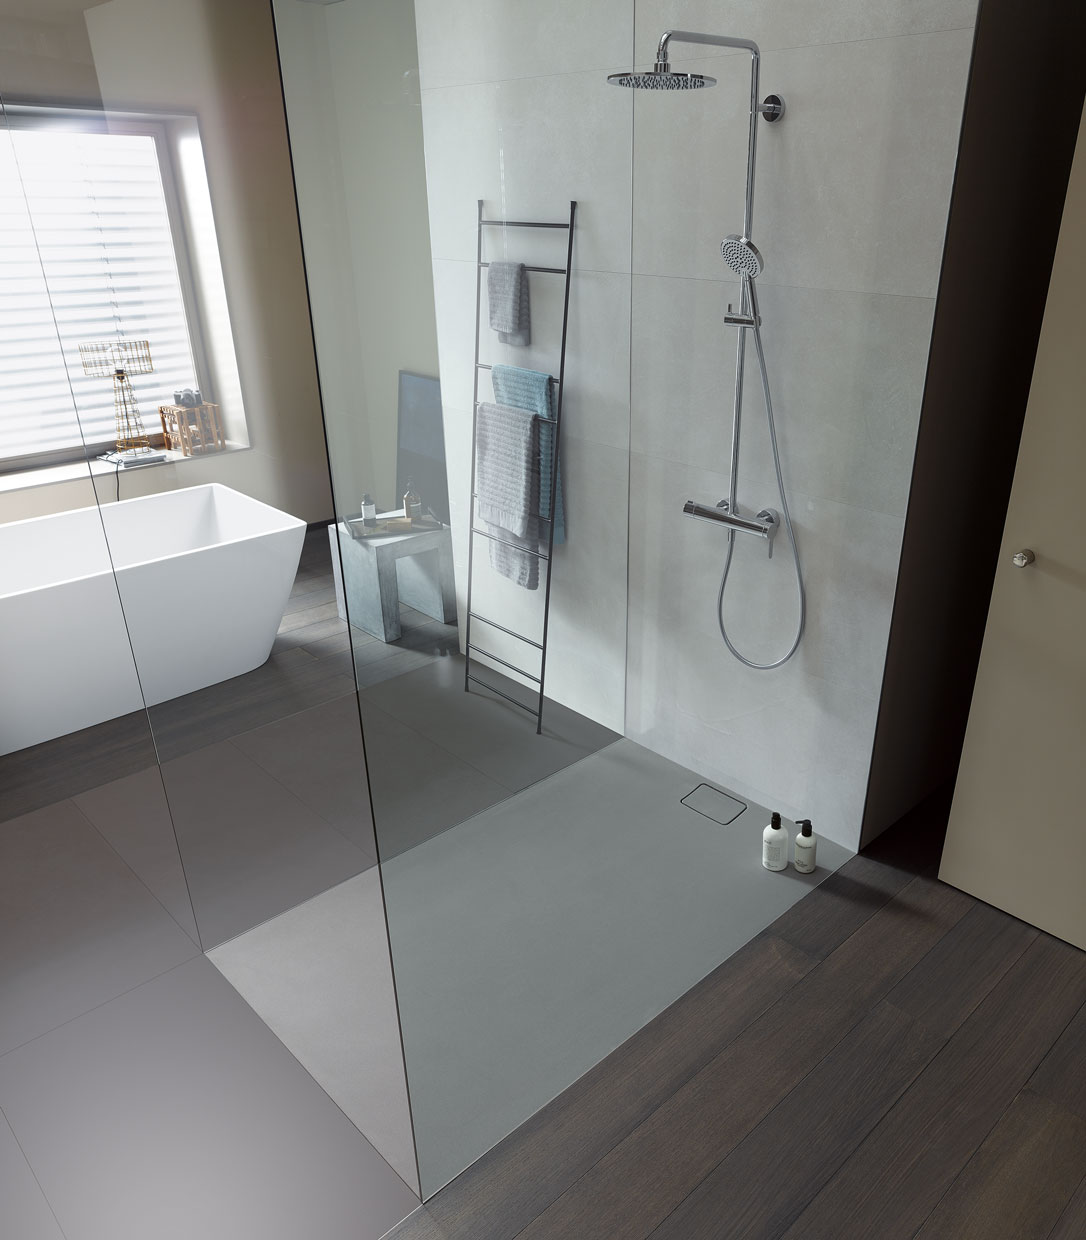 Bathroom with stonetto shower
